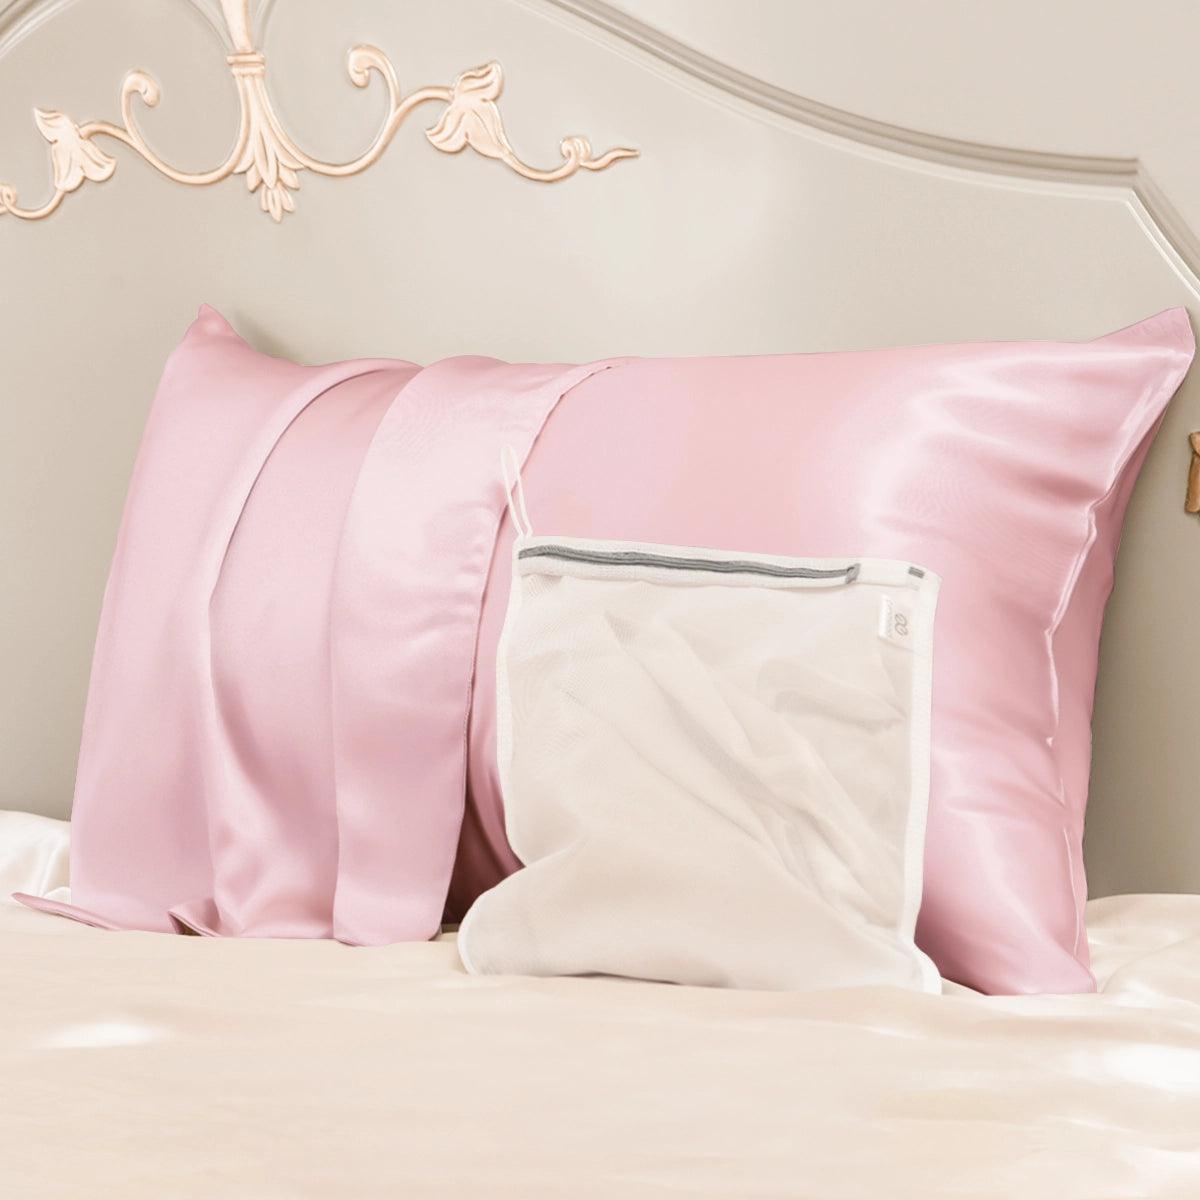 23 mm 6A+ Silk Pillowcase With Zipper With Laundry Bag - promeedsilk